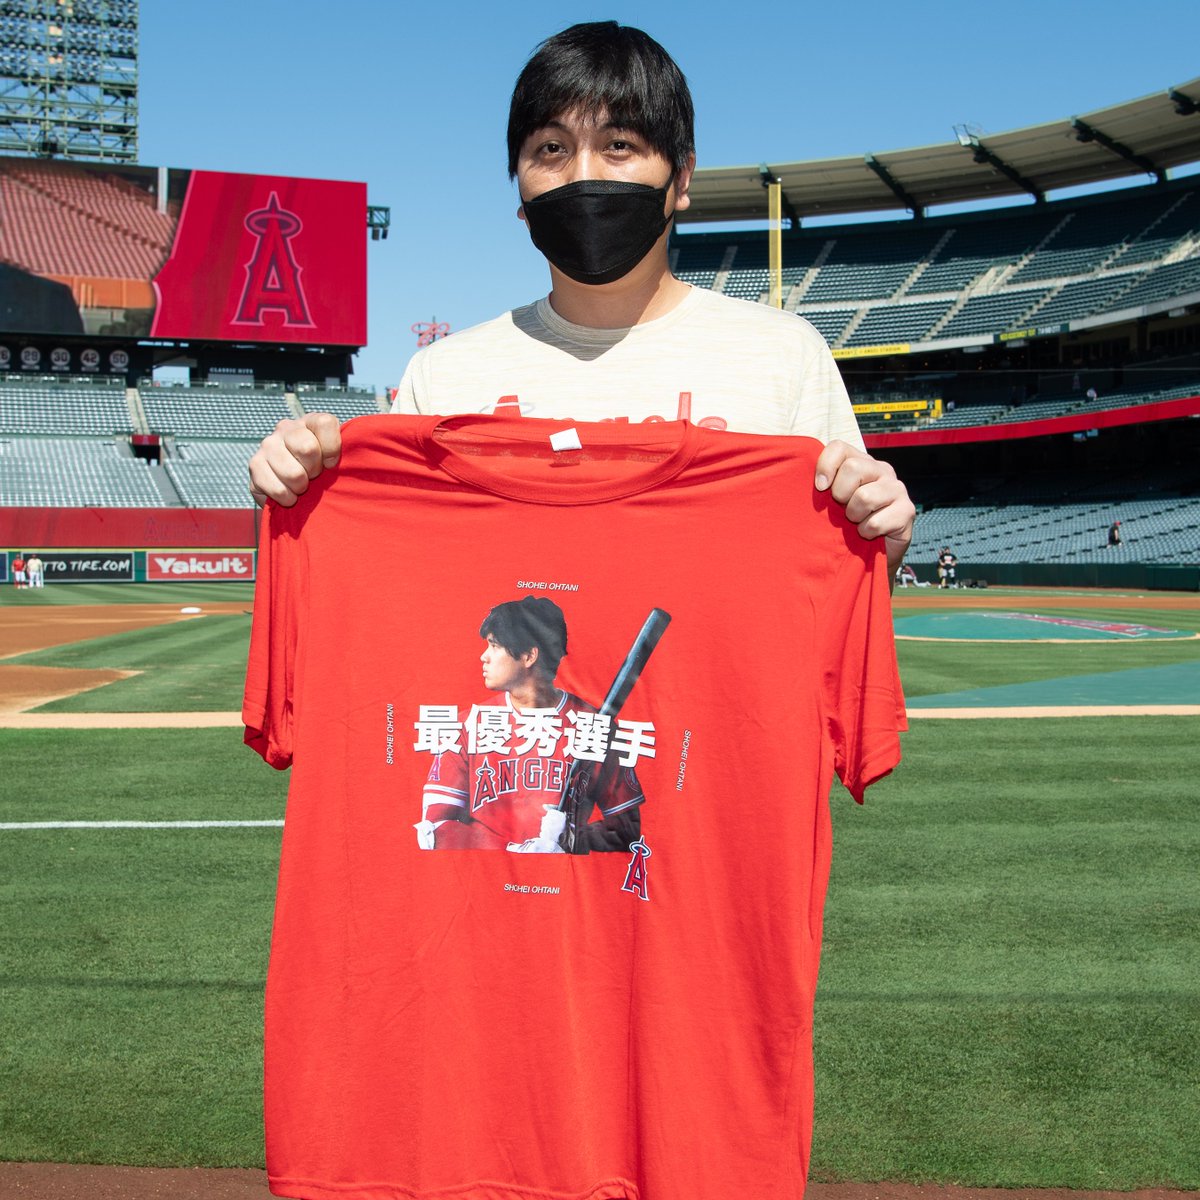 Official official Ohtani MVP Los Angeles Angels Stadium team shirt